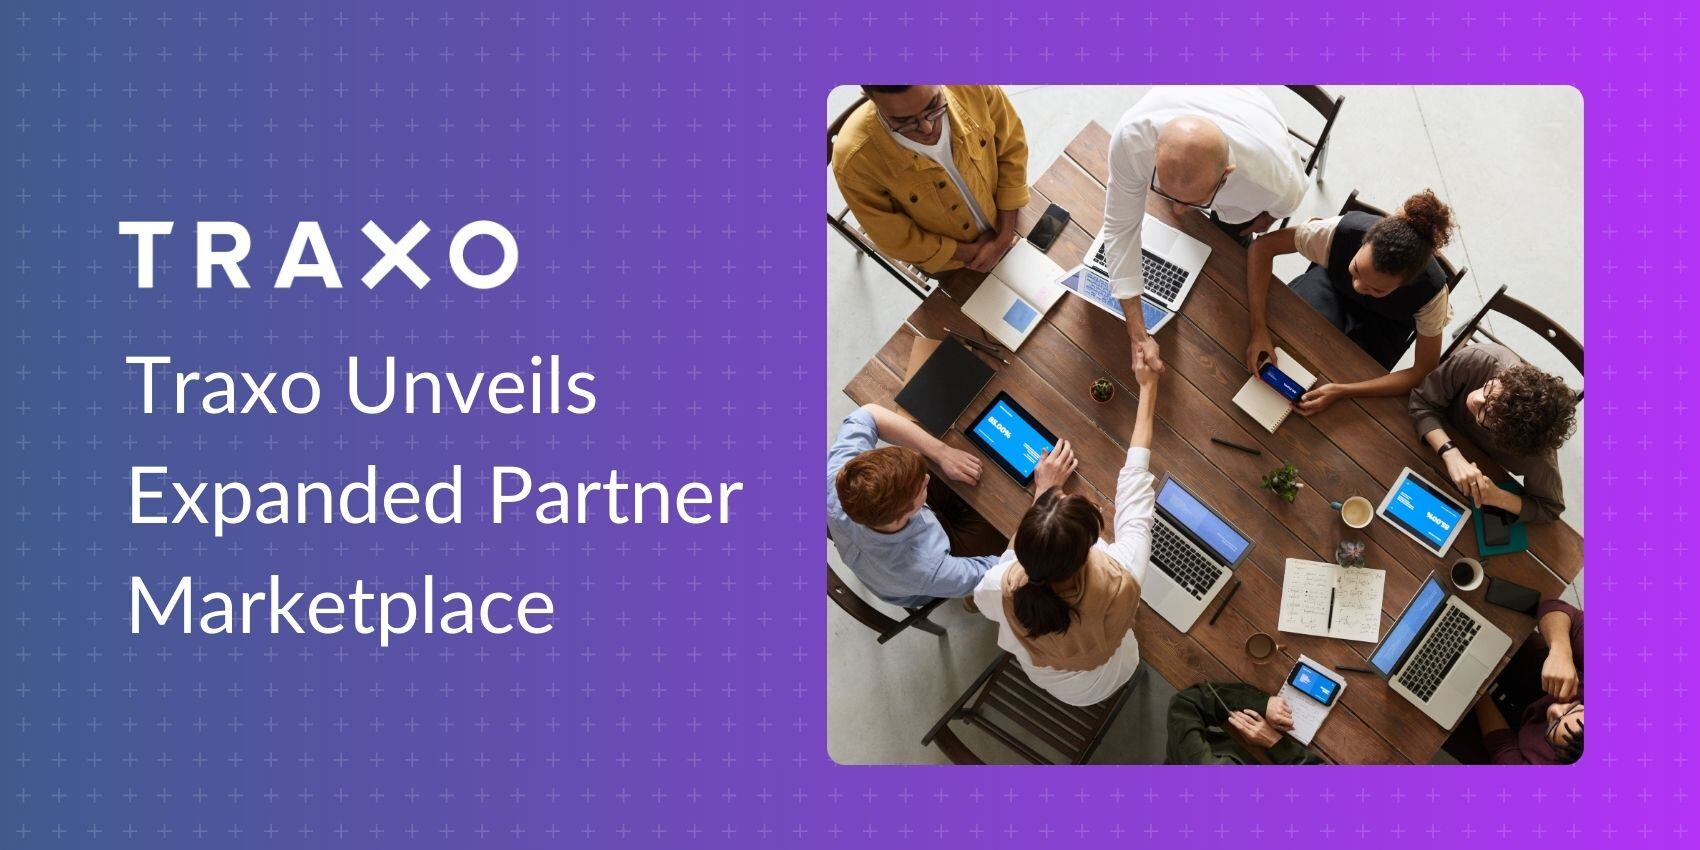 Decorative Image with Press Release Title "Traxo Unveils Expanded Partner Marketplace"